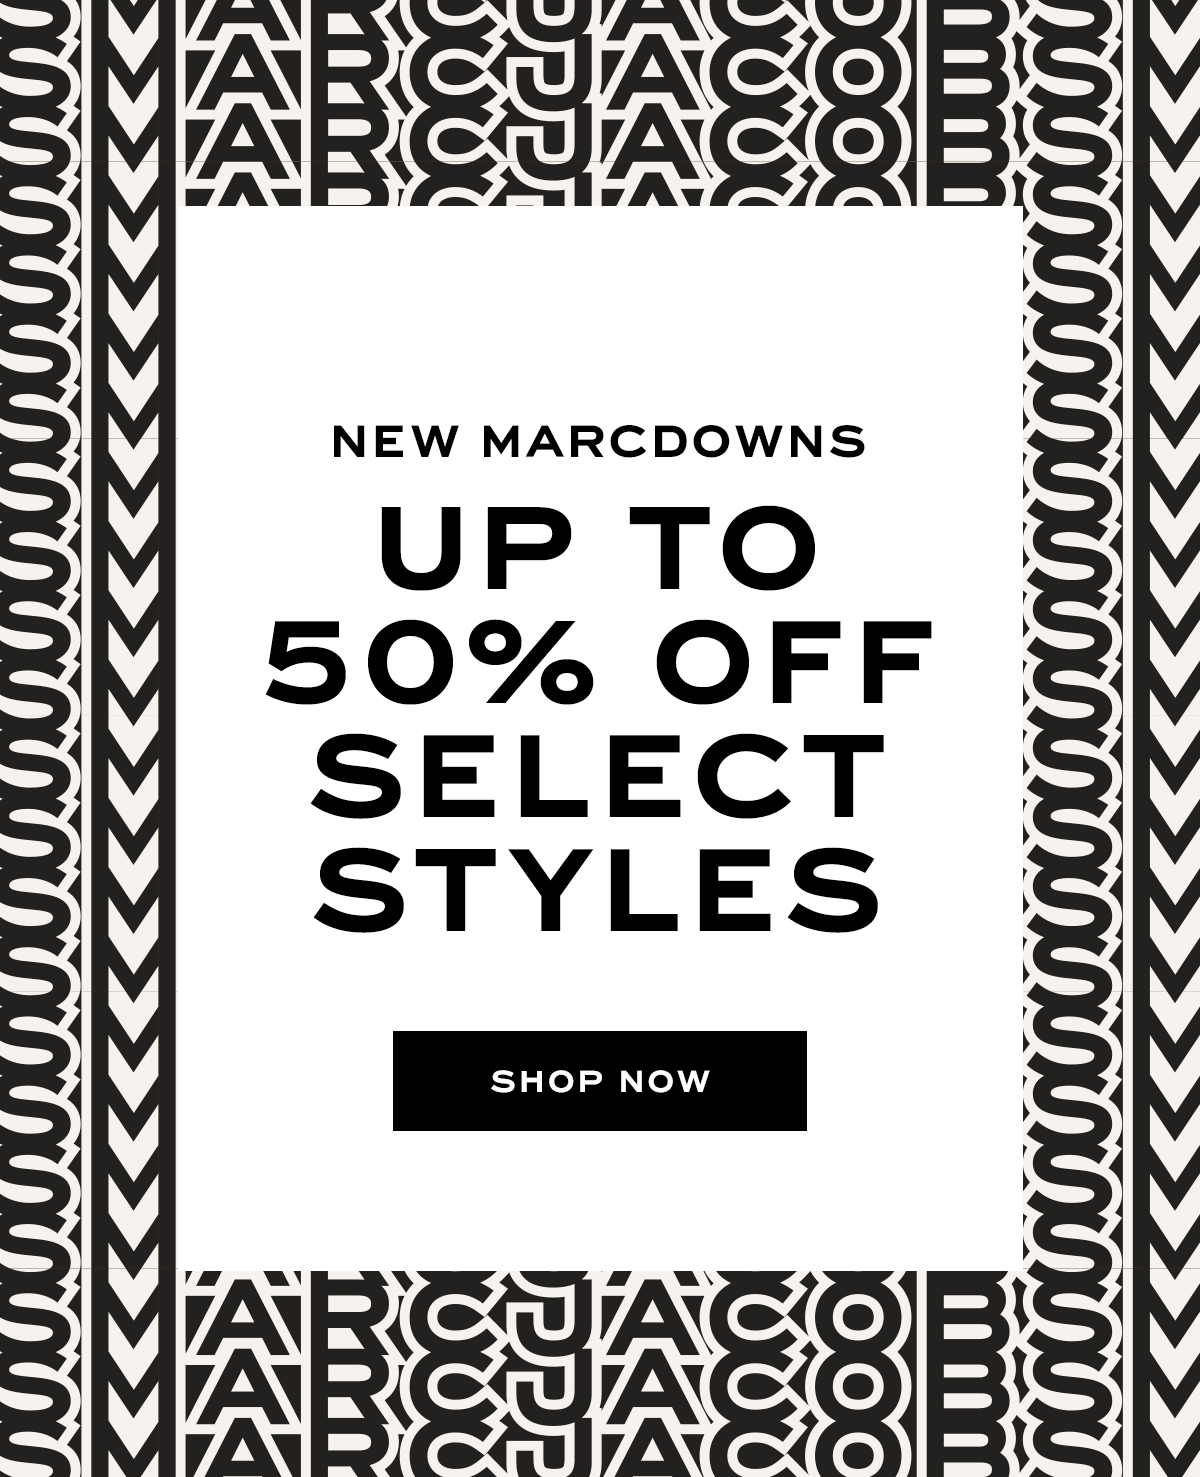 Marc Jacobs: More Marcdowns Up To 50% Off | Milled